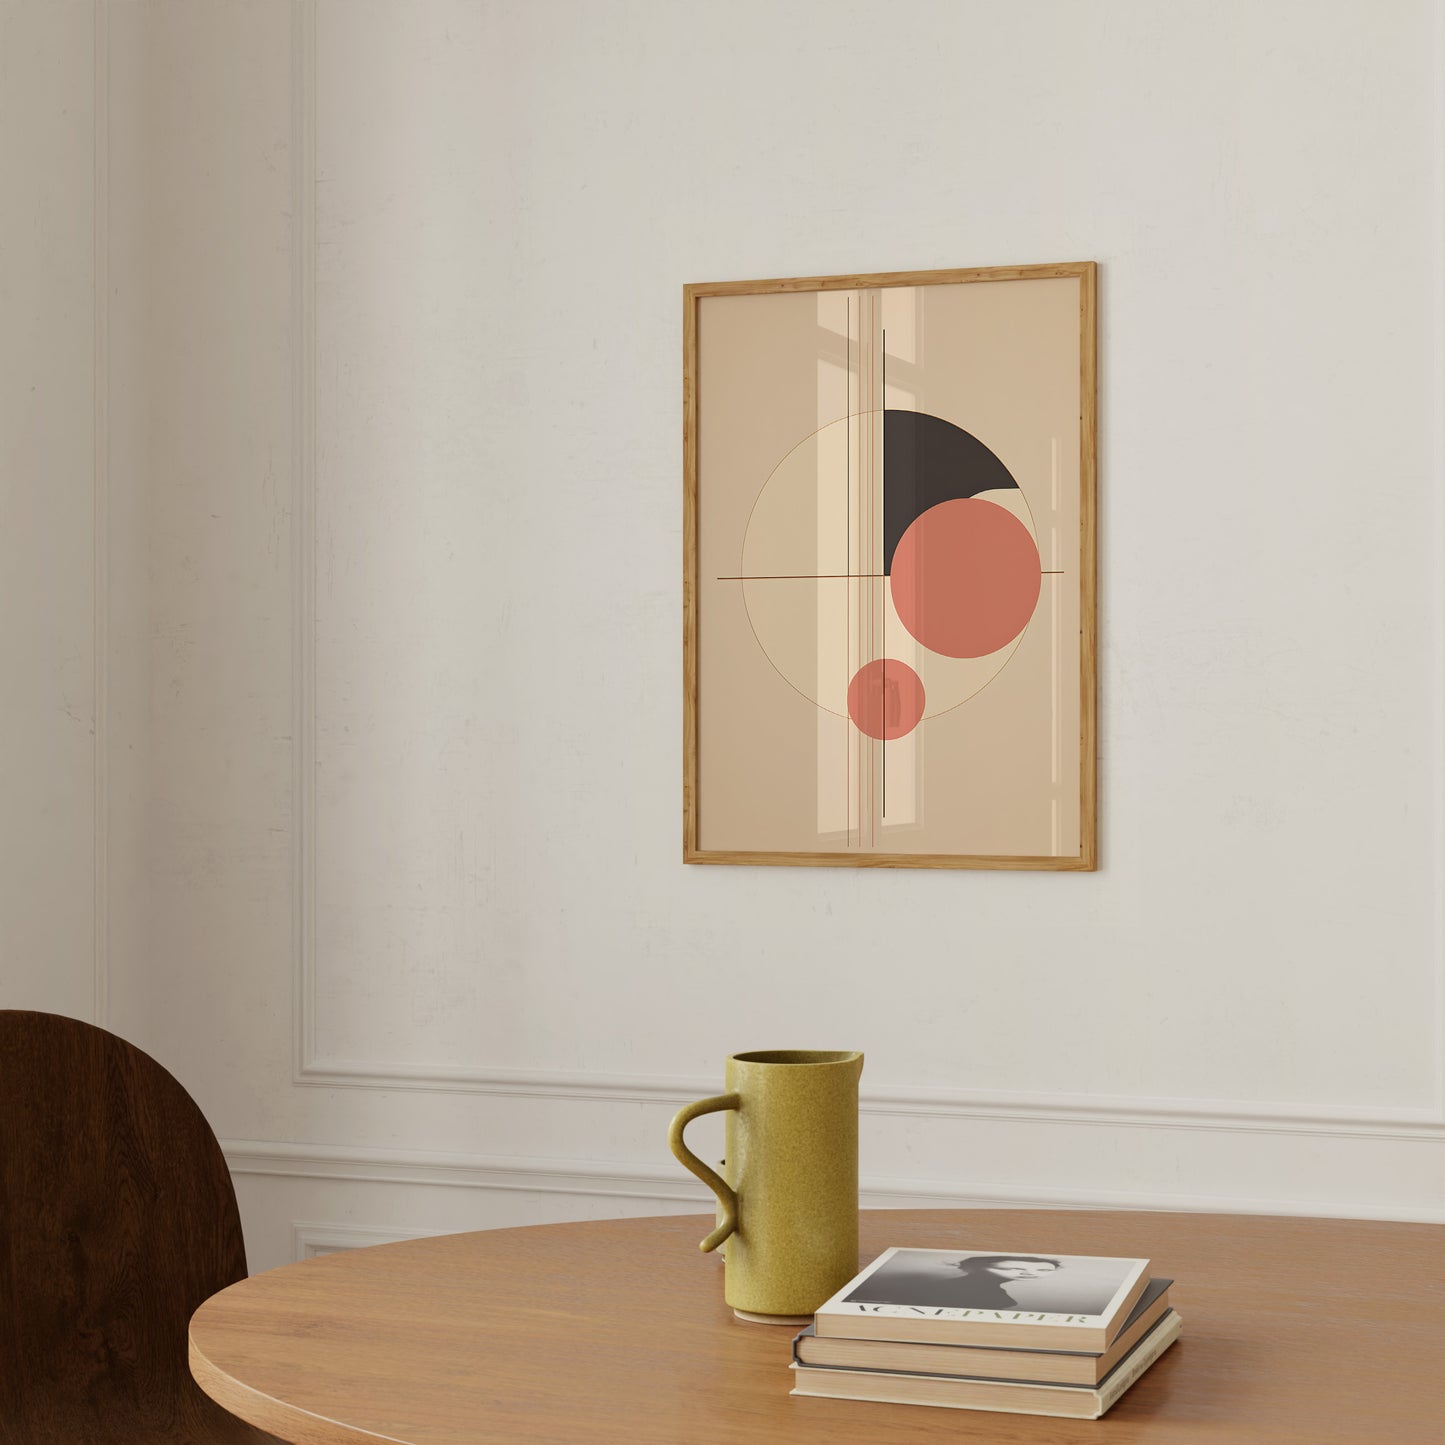 A modern art print above a table with a mustard mug and books in a serene room.